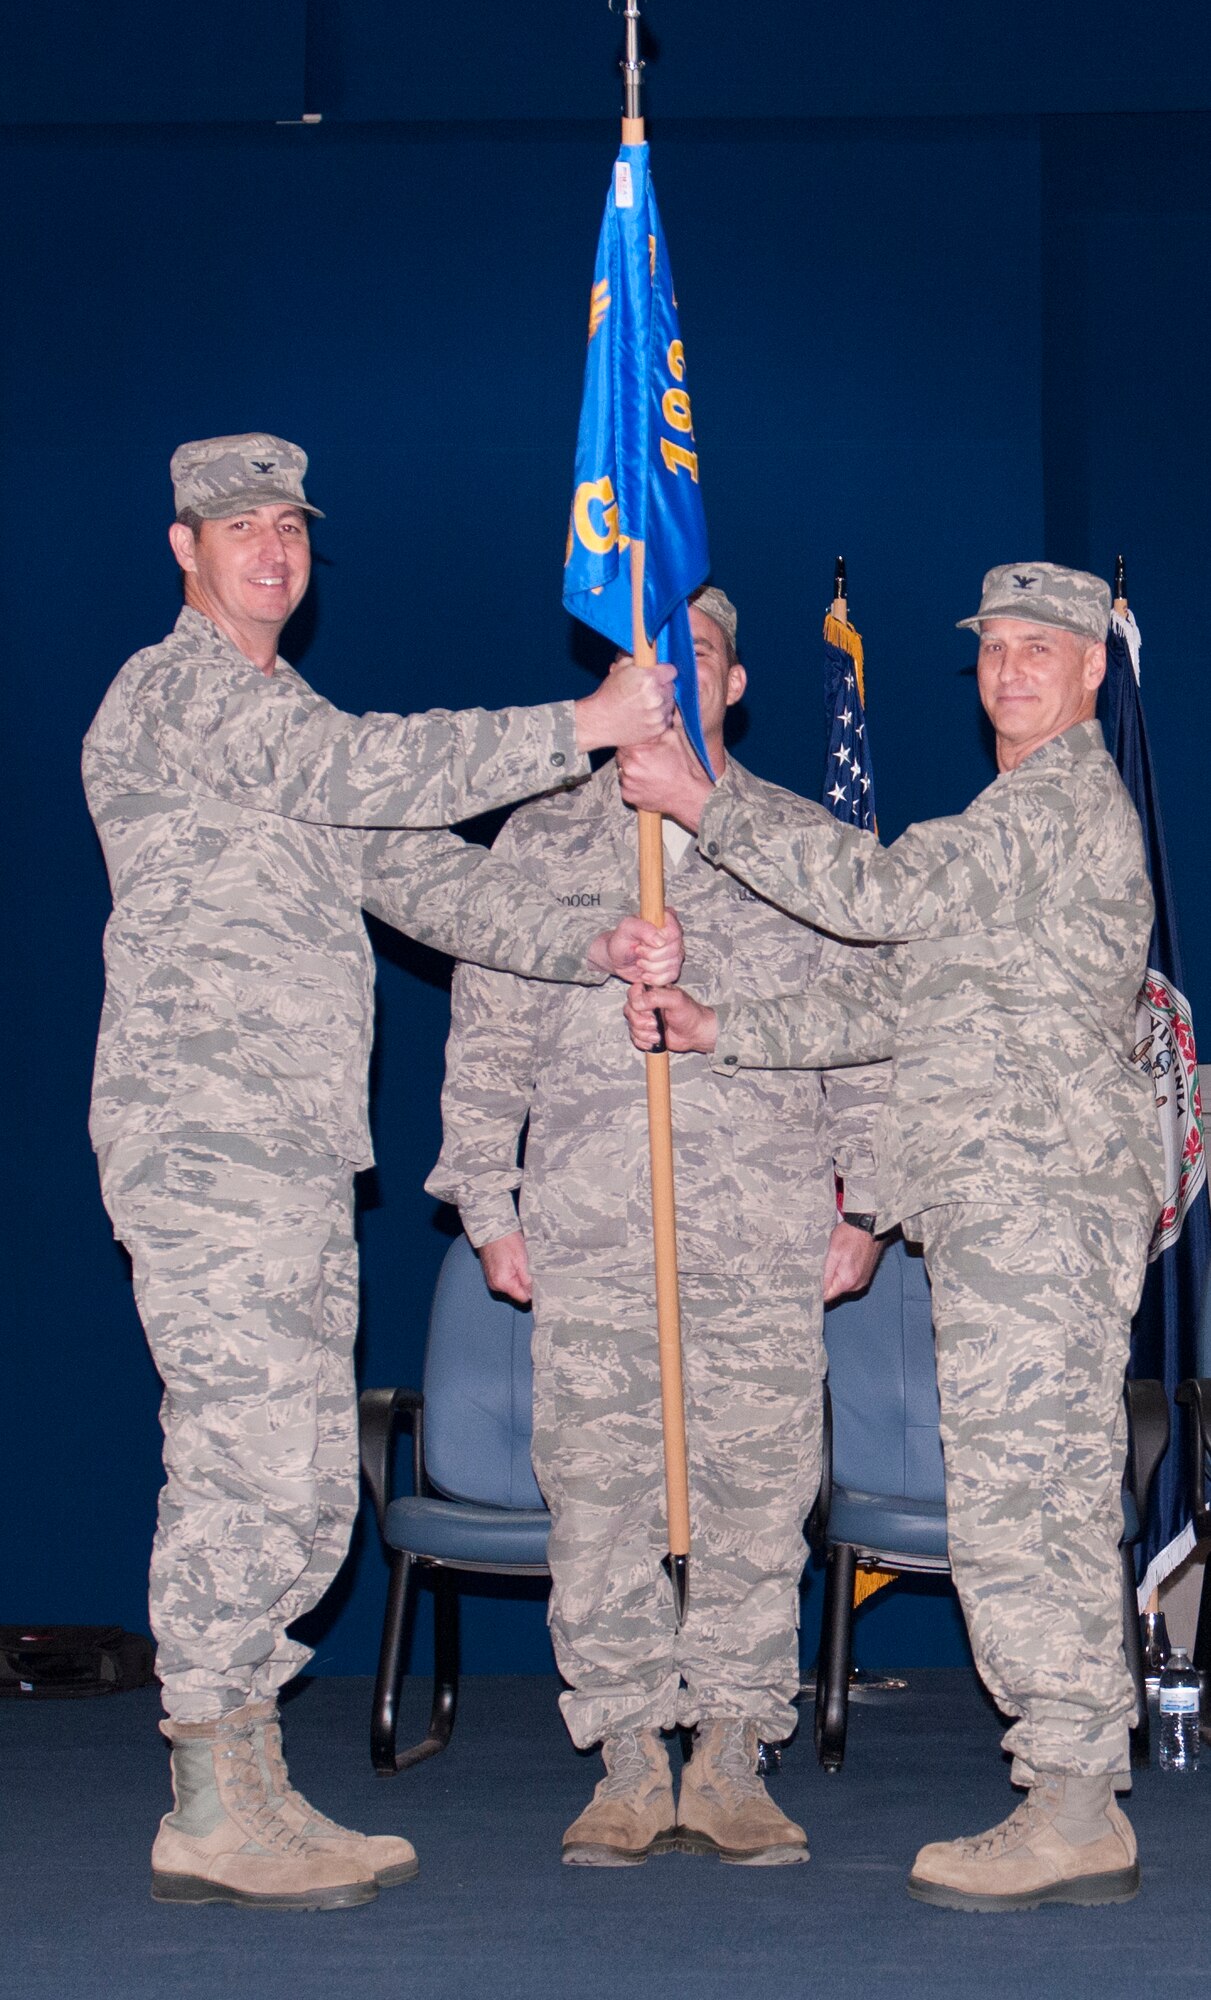 The 192nd Fighter Wing held a joint change of command ceremony for the 192nd Medical Group and Detachment 1 Chemical, Biological, Radiological, Nuclear and High-Yield Explosive Enhanced Response Force Package (CERFP), Medical Group, March 20, 2016, at Joint Base Langley-Eustis, Virginia. (U.S. Air National Guard photo by Technical Sgt. Jonathan P. Garcia)